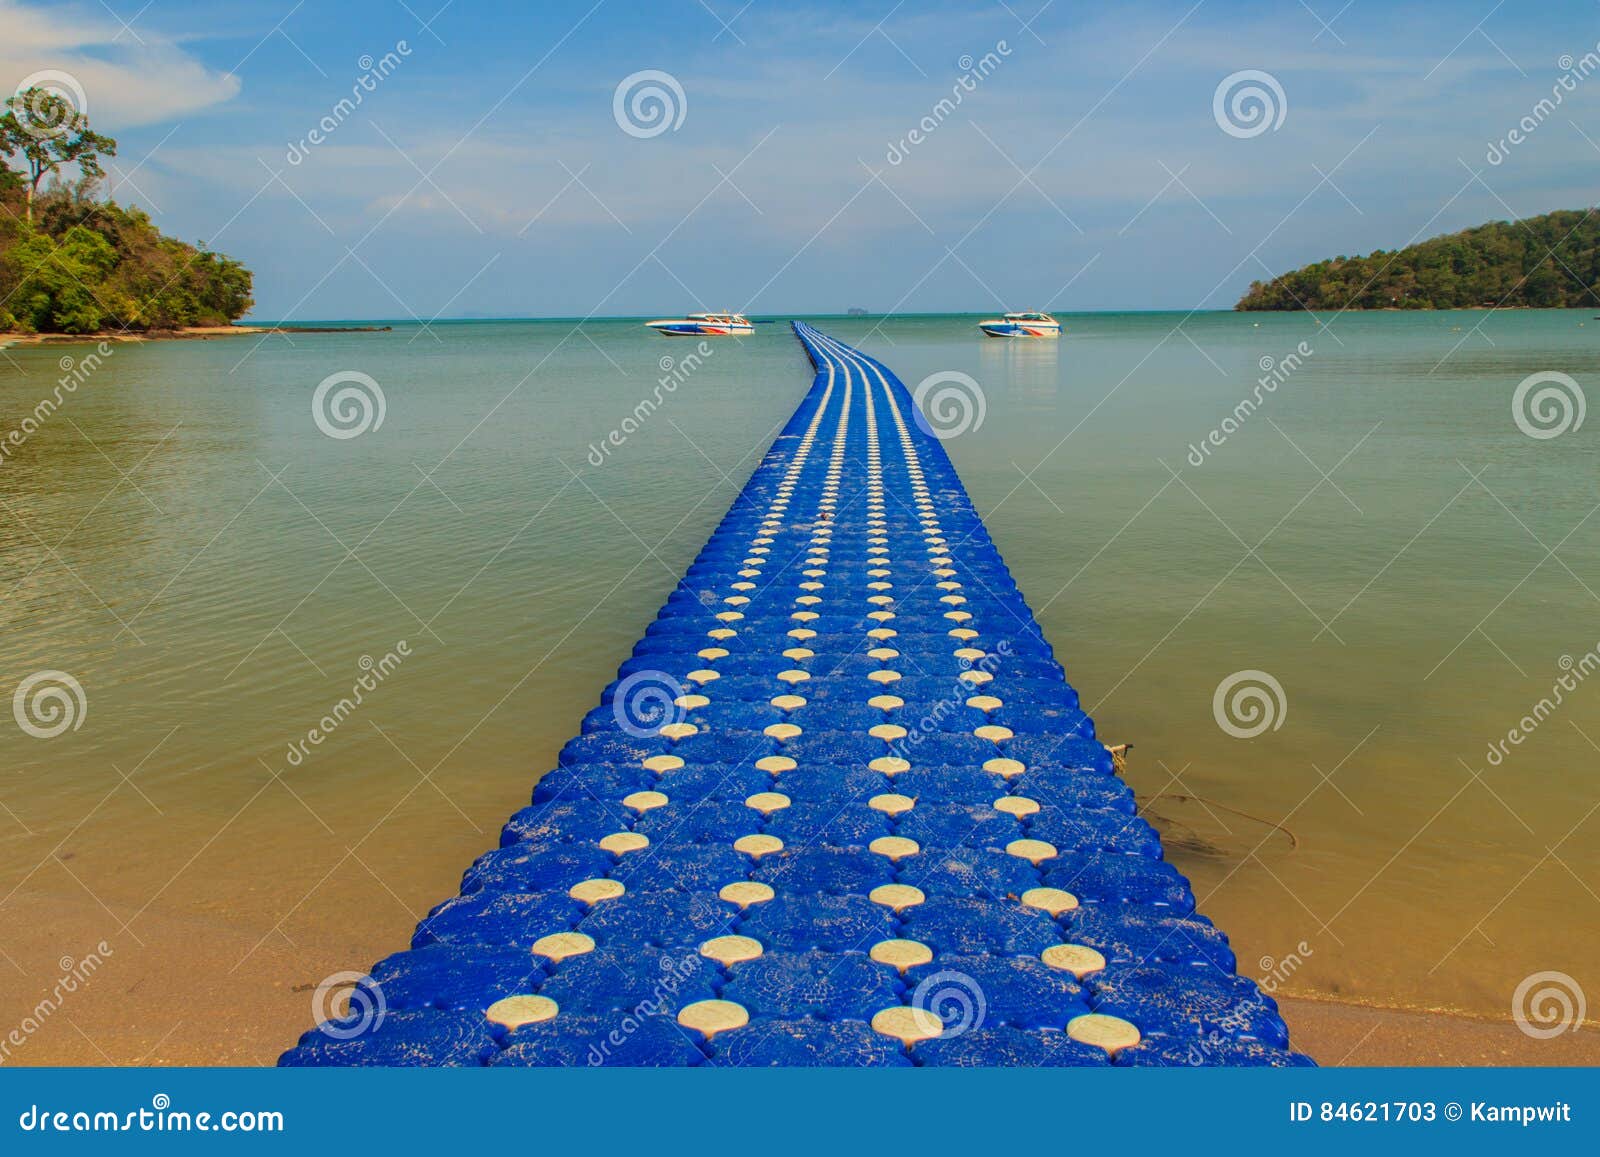 Beautiful Blue Pontoon Made From Plastic Floating In The Sea Rotomolding Jetty A Landing Stage Or Small Pier At Which Boats Can Stock Image Image Of Clear Float 84621703